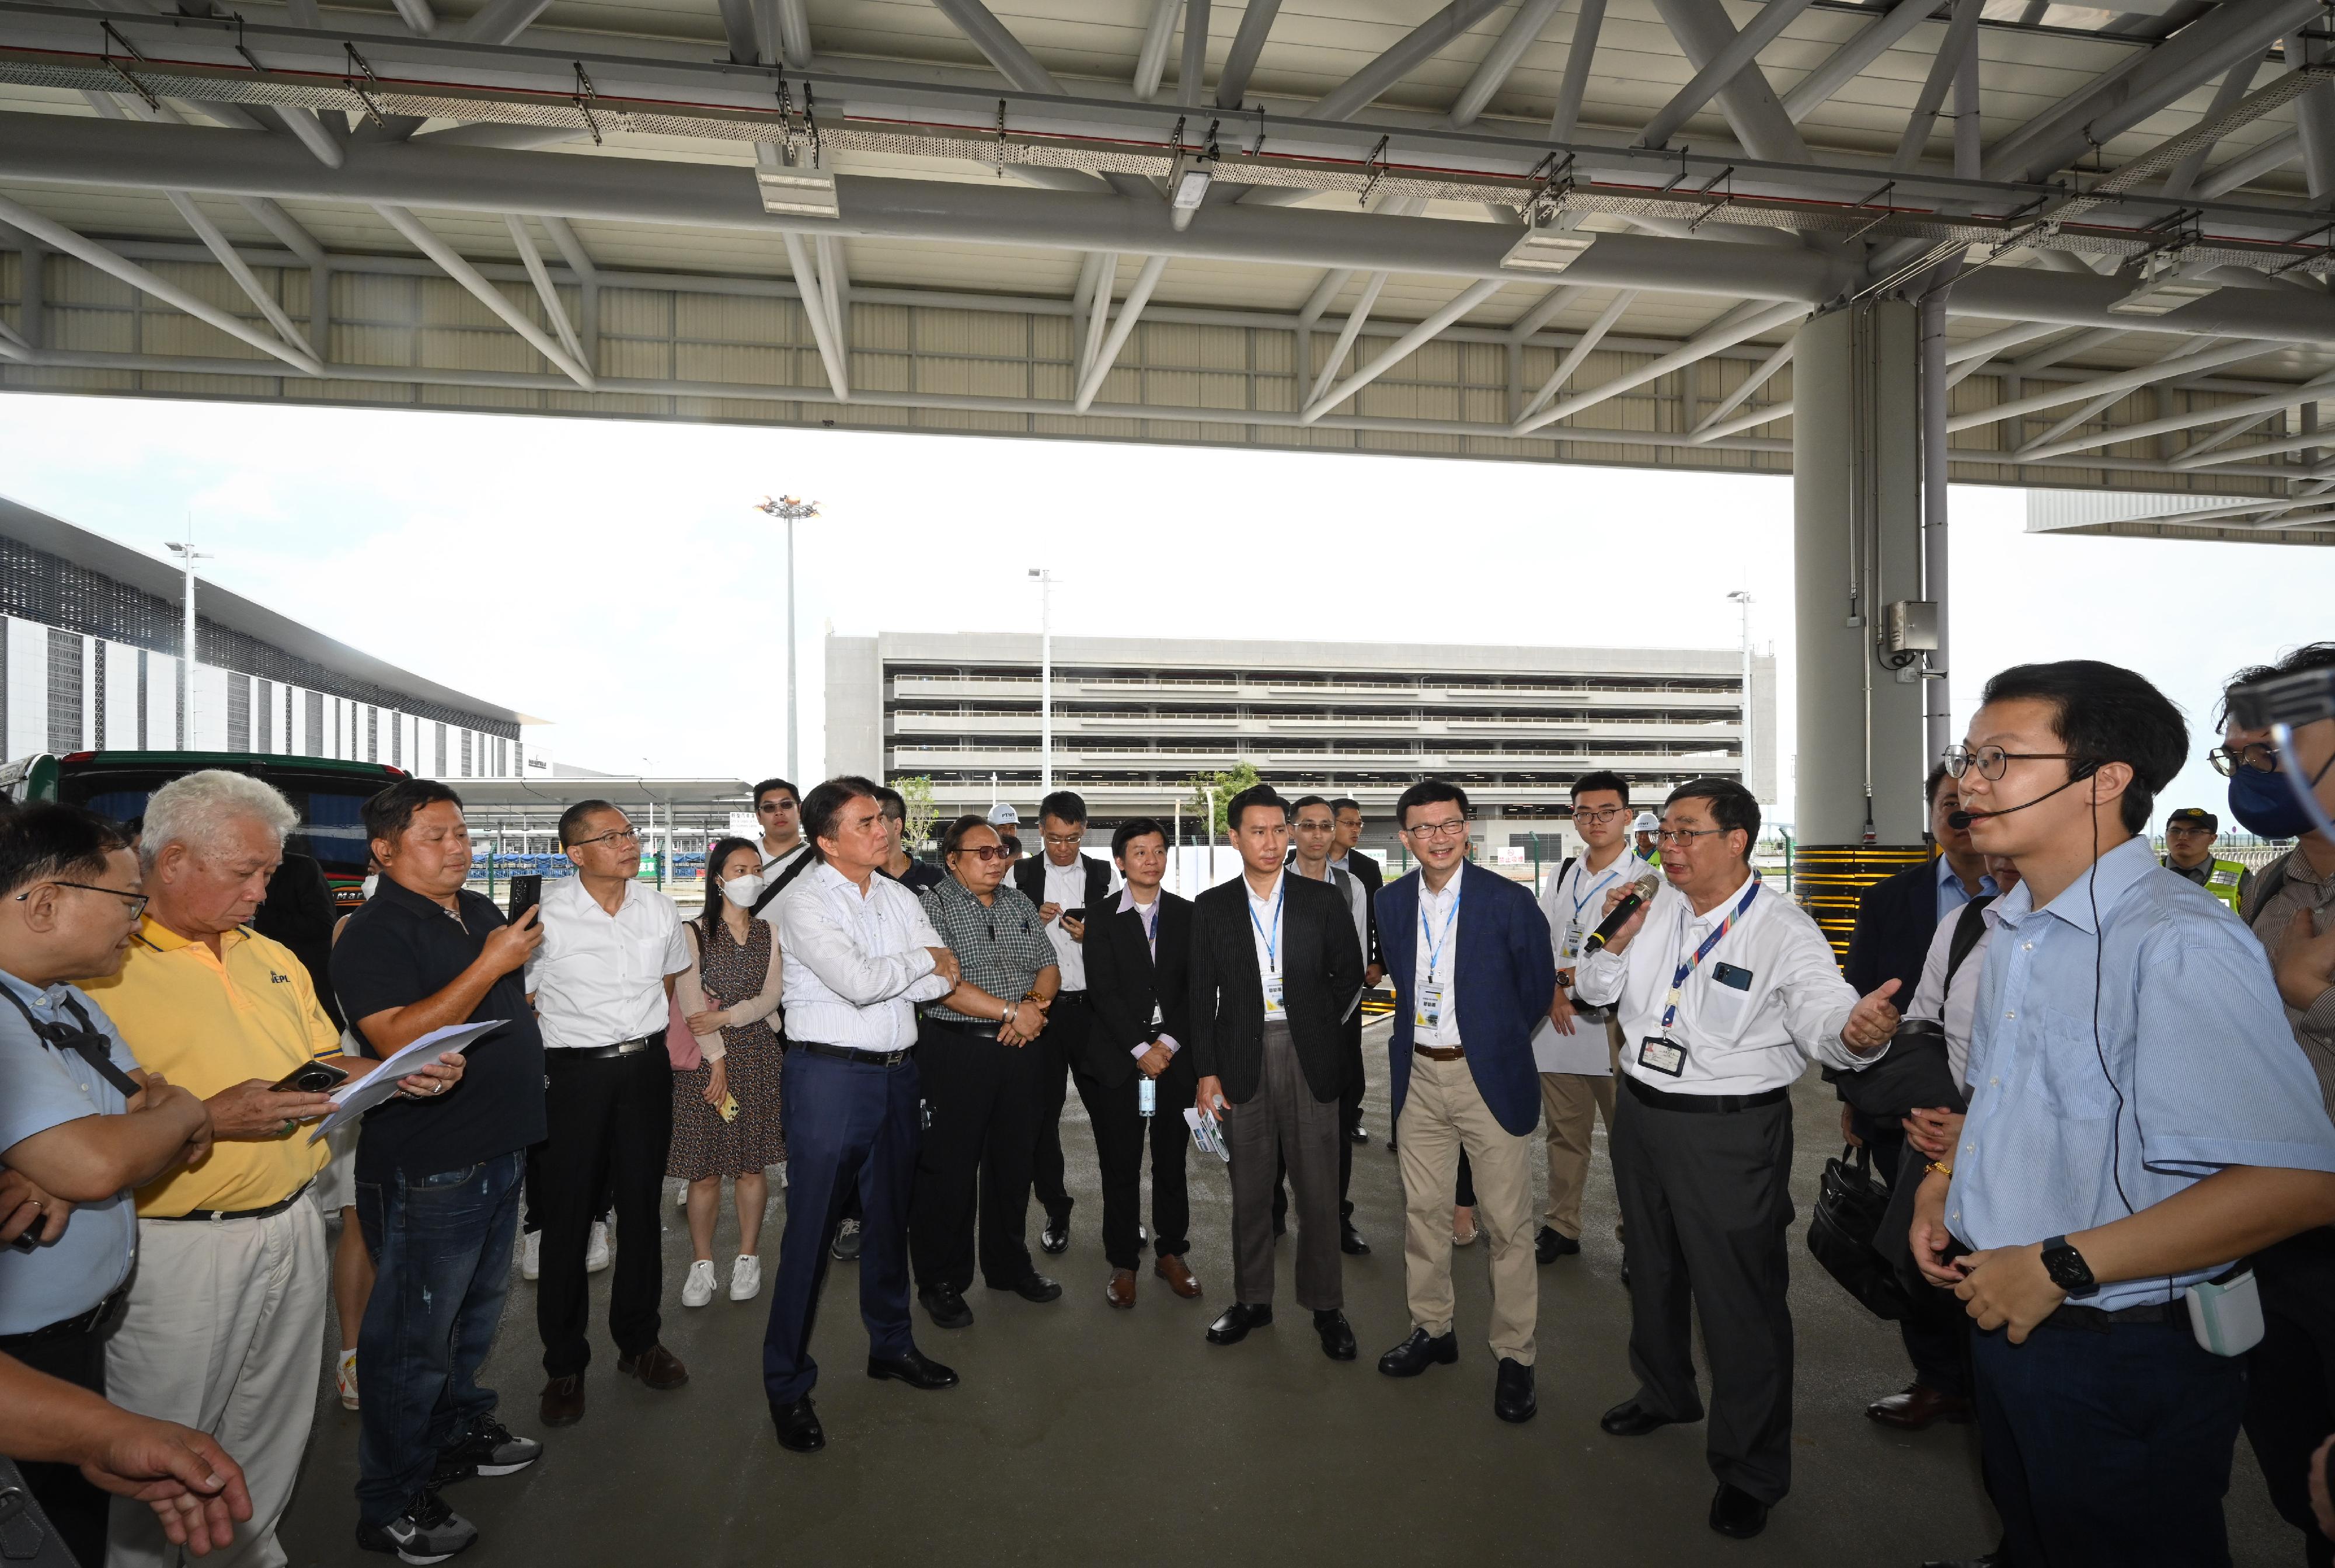 Following the discussions and agreement made between the governments of Hong Kong and Macao, the arrangement for Hong Kong-Macao cross-boundary goods vehicles using the Hong Kong-Zhuhai-Macao Bridge (HZMB) will be implemented. Photo shows the Under Secretary for Transport and Logistics, Mr Liu Chun-san (third right), and representatives of the Hong Kong logistics trades being briefed by the Subdirector of the Macao Transport Bureau, Mr Chiang Ngoc Vai (second right), on the HZMB Macao Port transfer facility as well as the operational procedures for Hong Kong goods vehicles travelling to Macao.